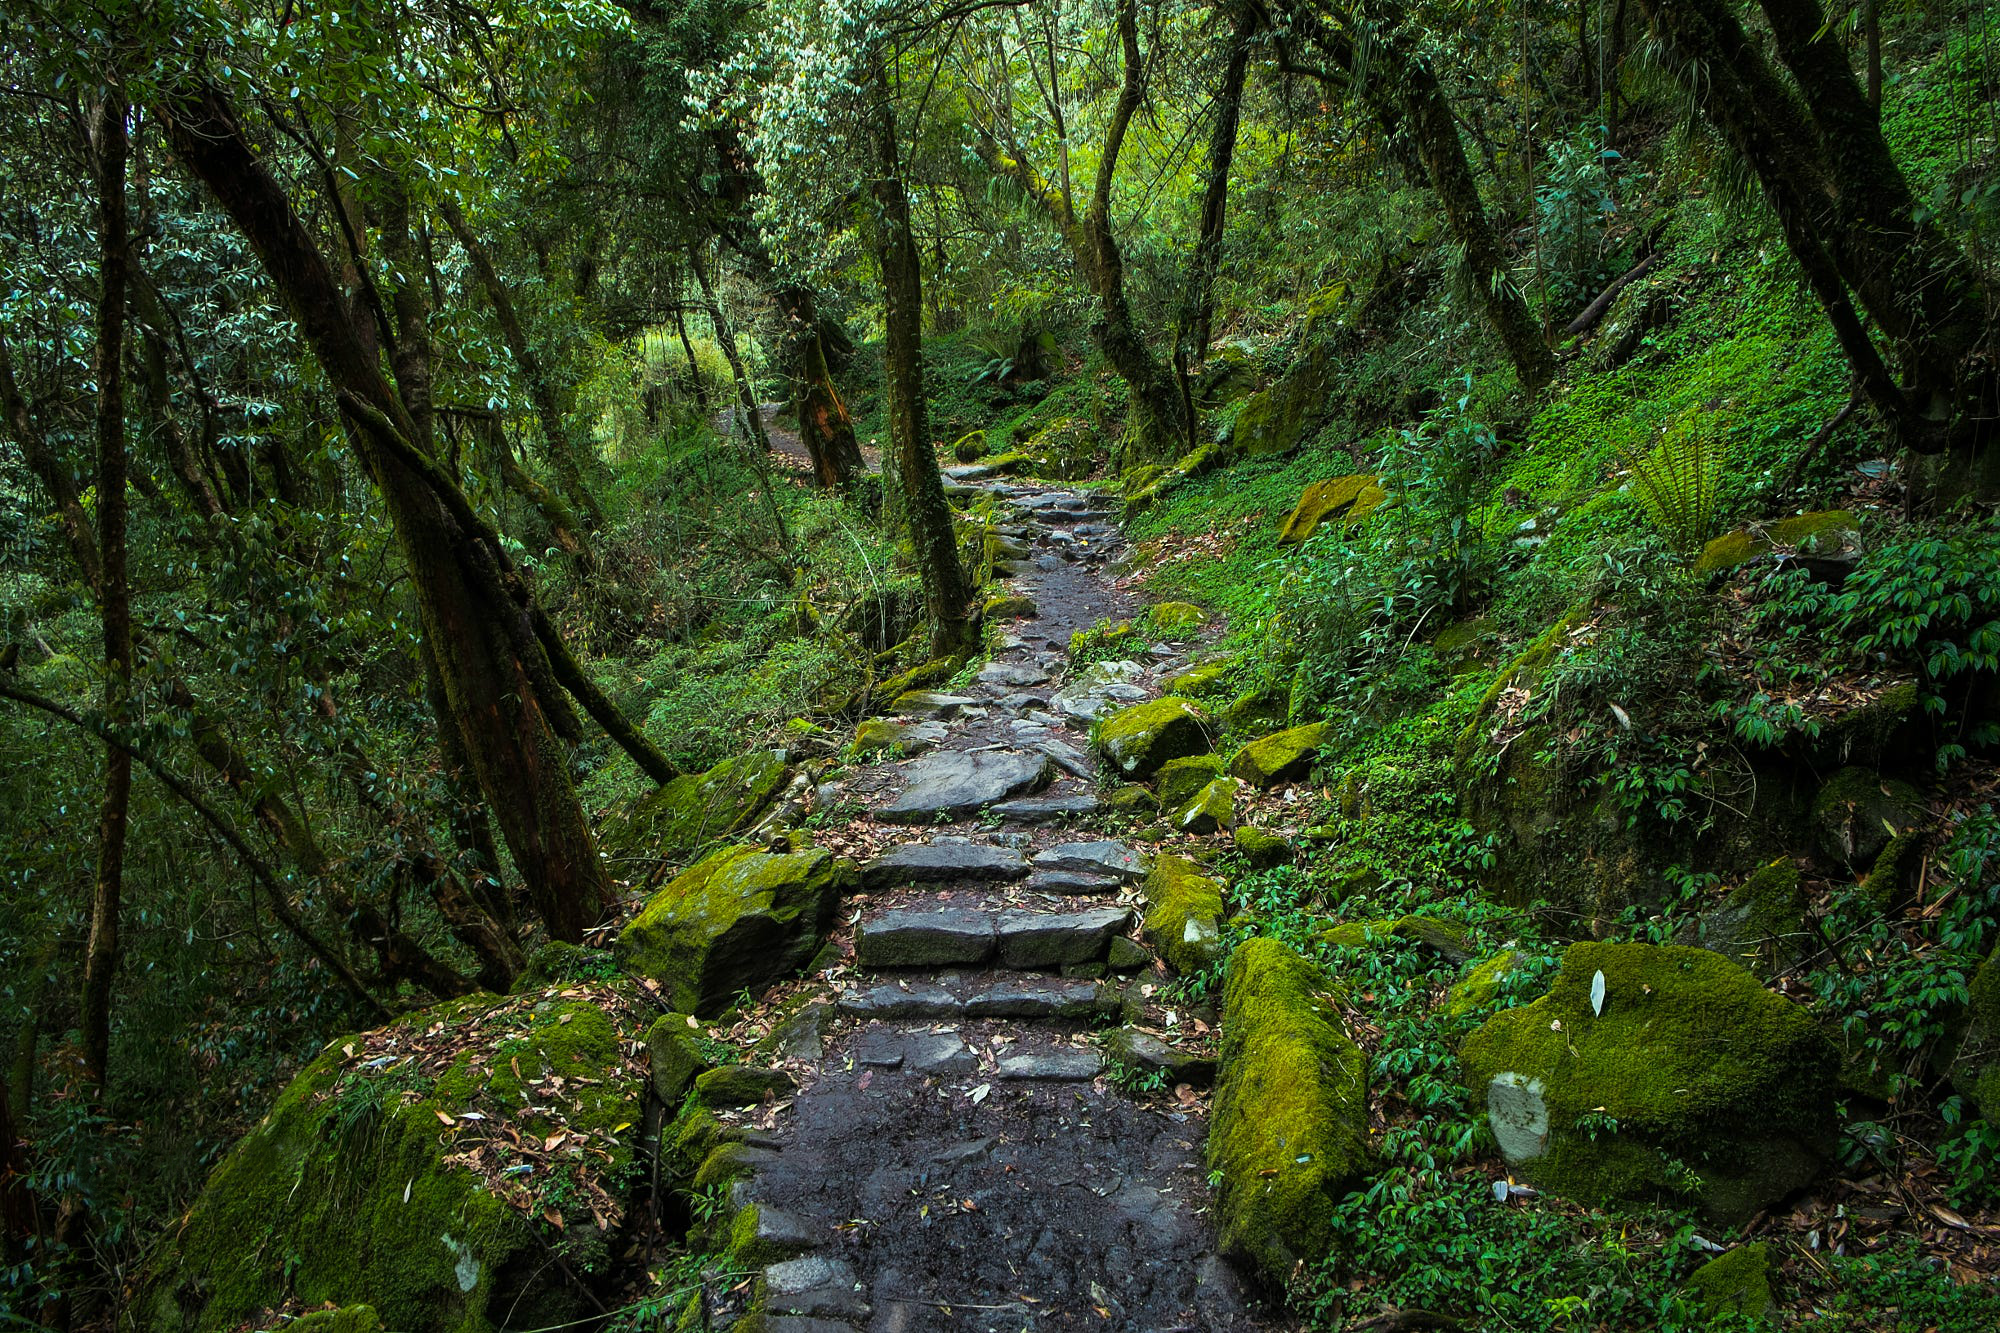 General 2000x1333 jungle nature trees forest green path plants mountain pass moss stones wet ferns